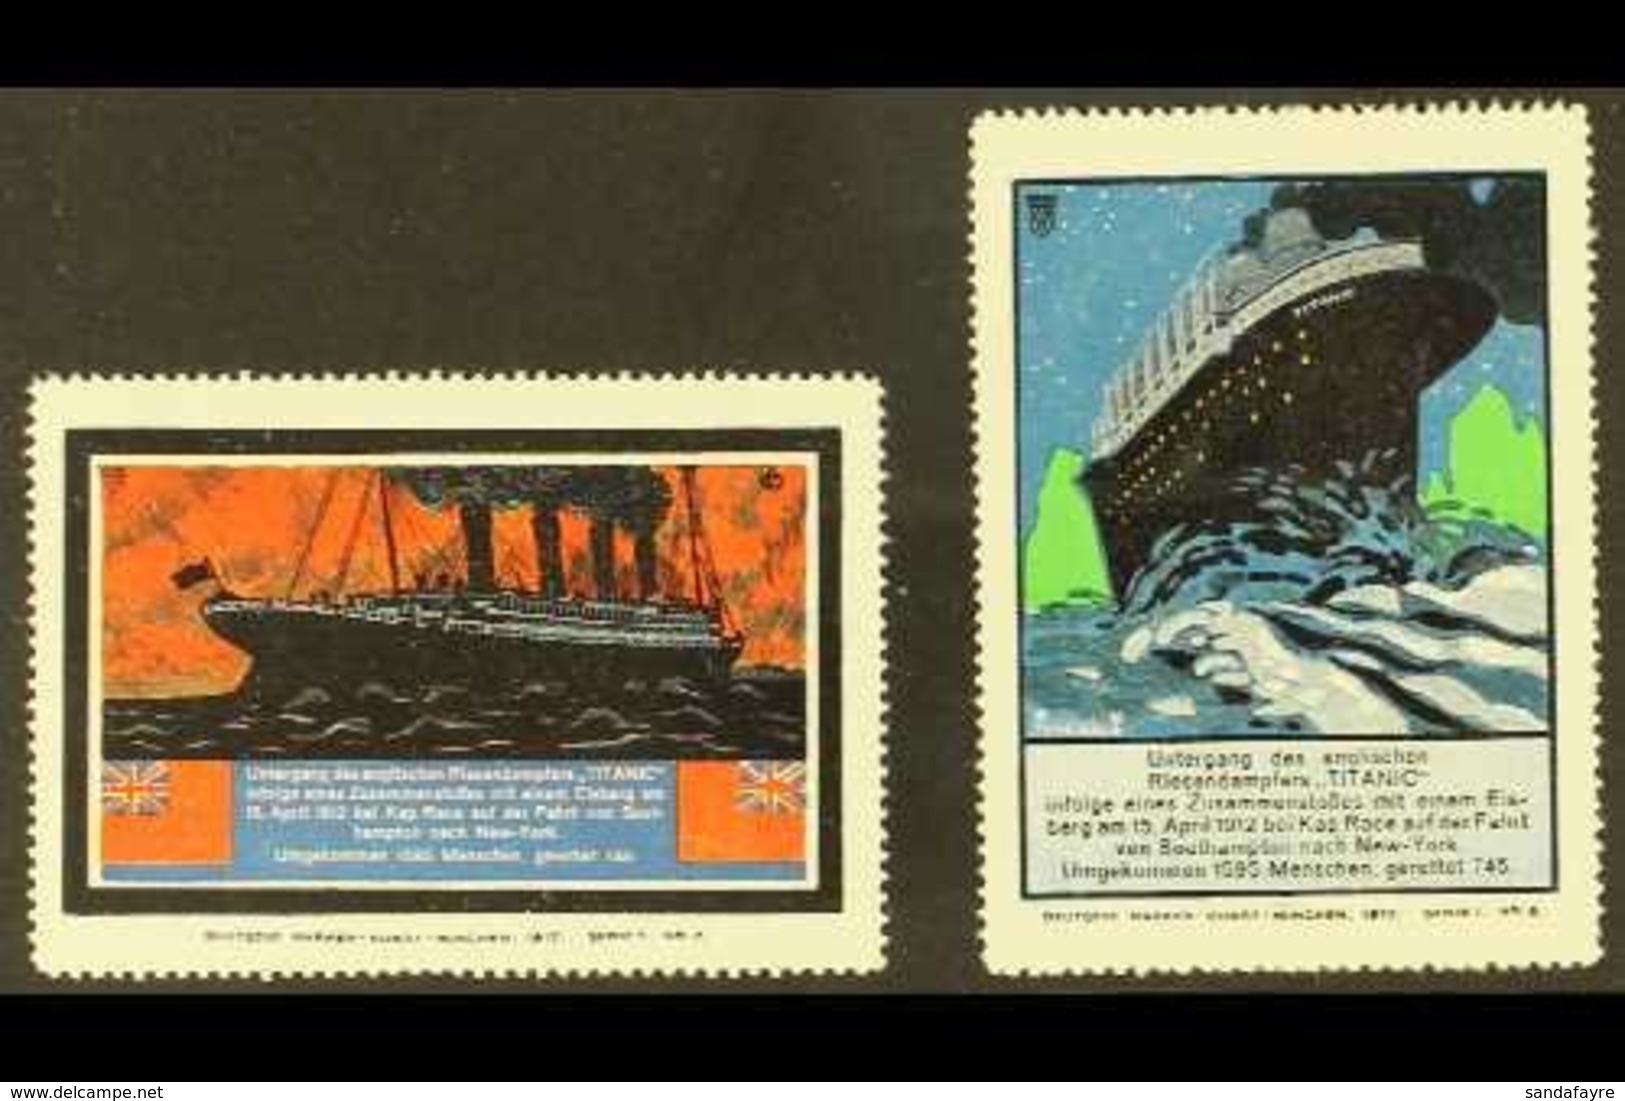 TITANIC Germany 1912 Poster Stamps, Two Different Depicting Dramatic Illustrations Of RMS Titanic With Text In German Be - Unclassified